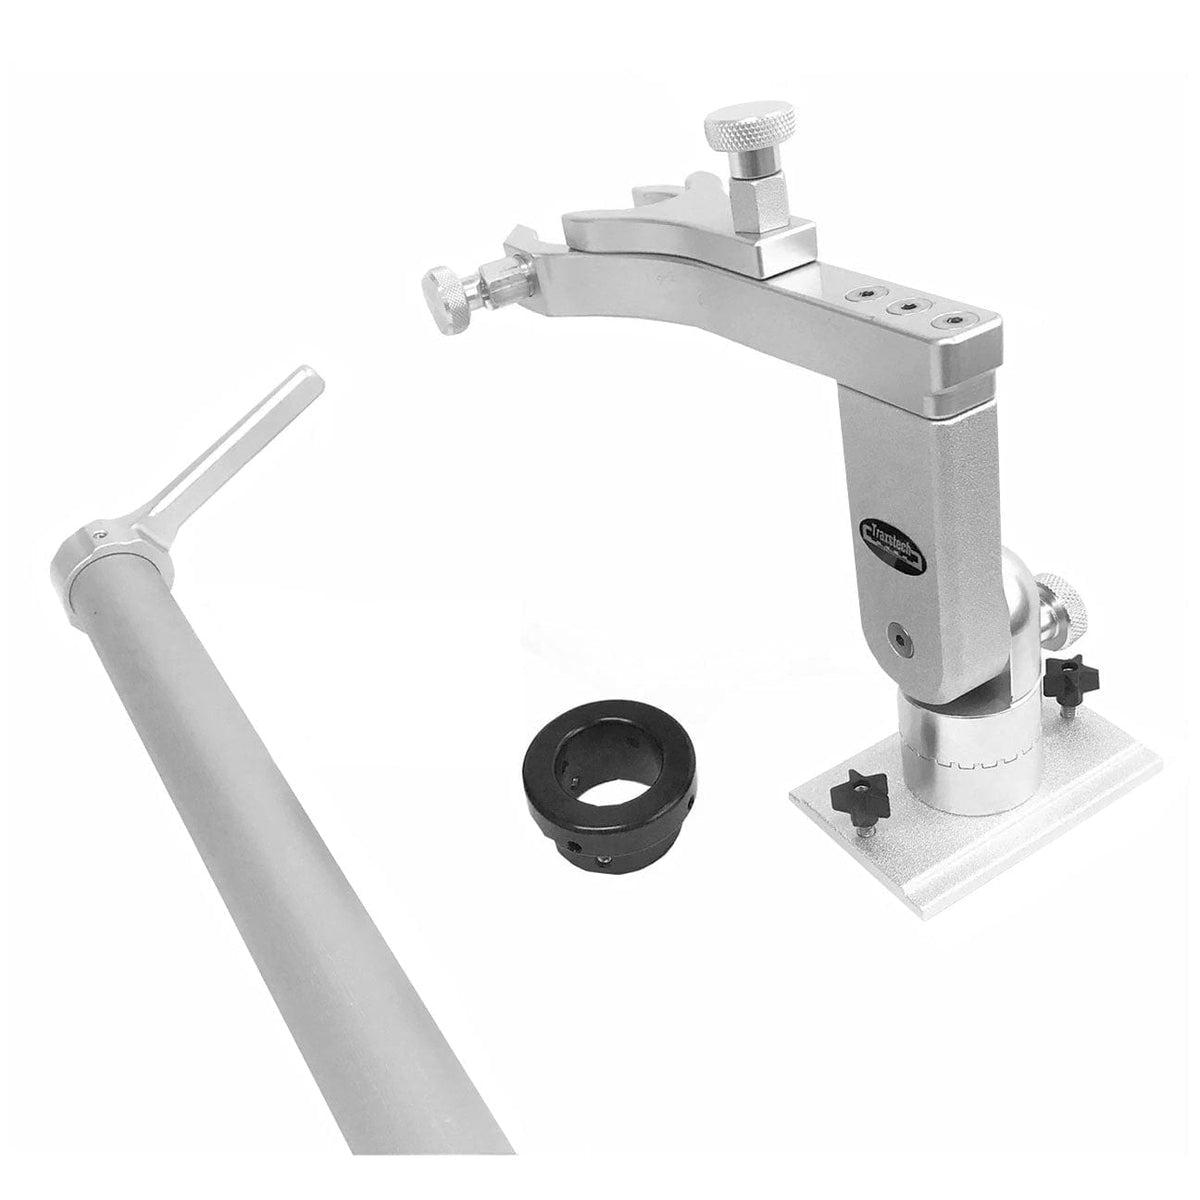 Traxstech Qualifies for Free Shipping Traxstech Transducer Mount Assembly with 5' Pole & Collar #TM-1000